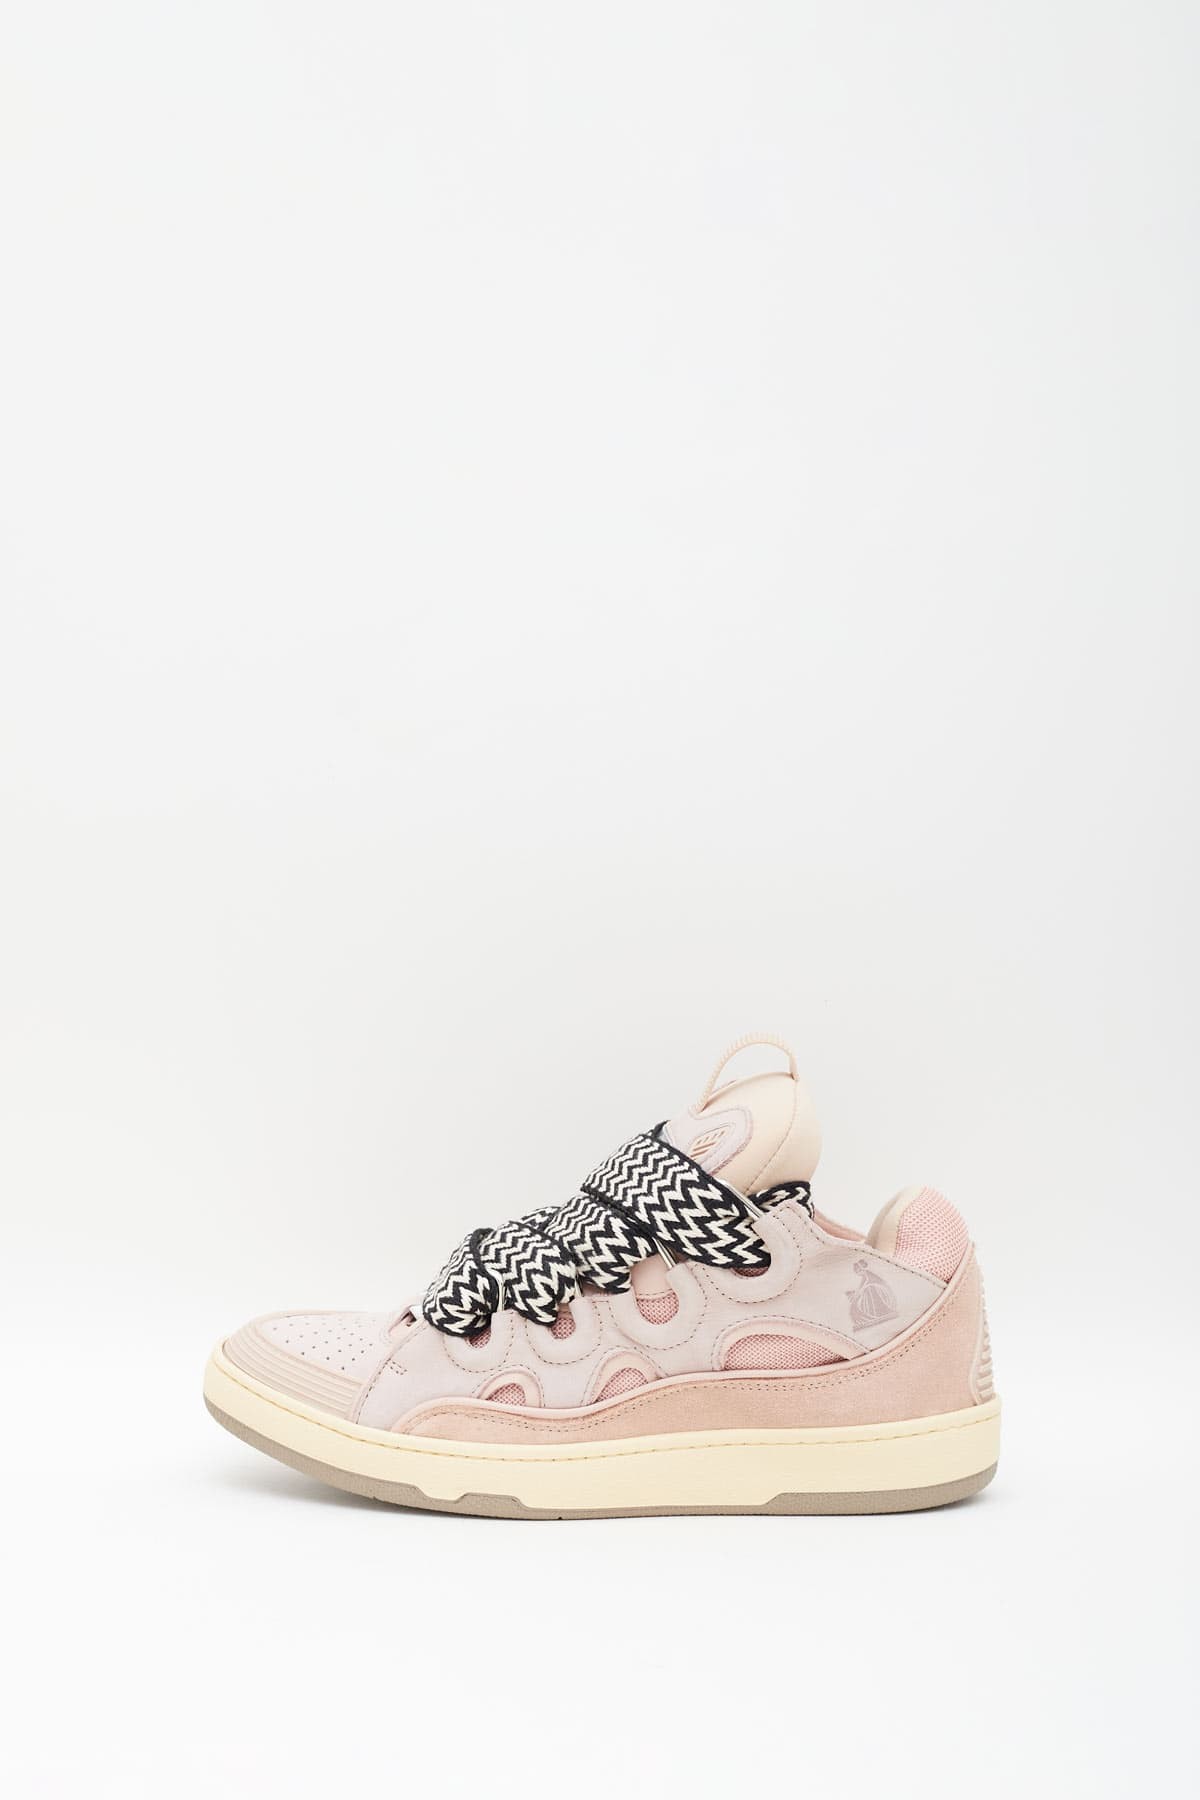 LANVIN ROSE PALE LEATHER CURB SNEAKERS IAMNUE